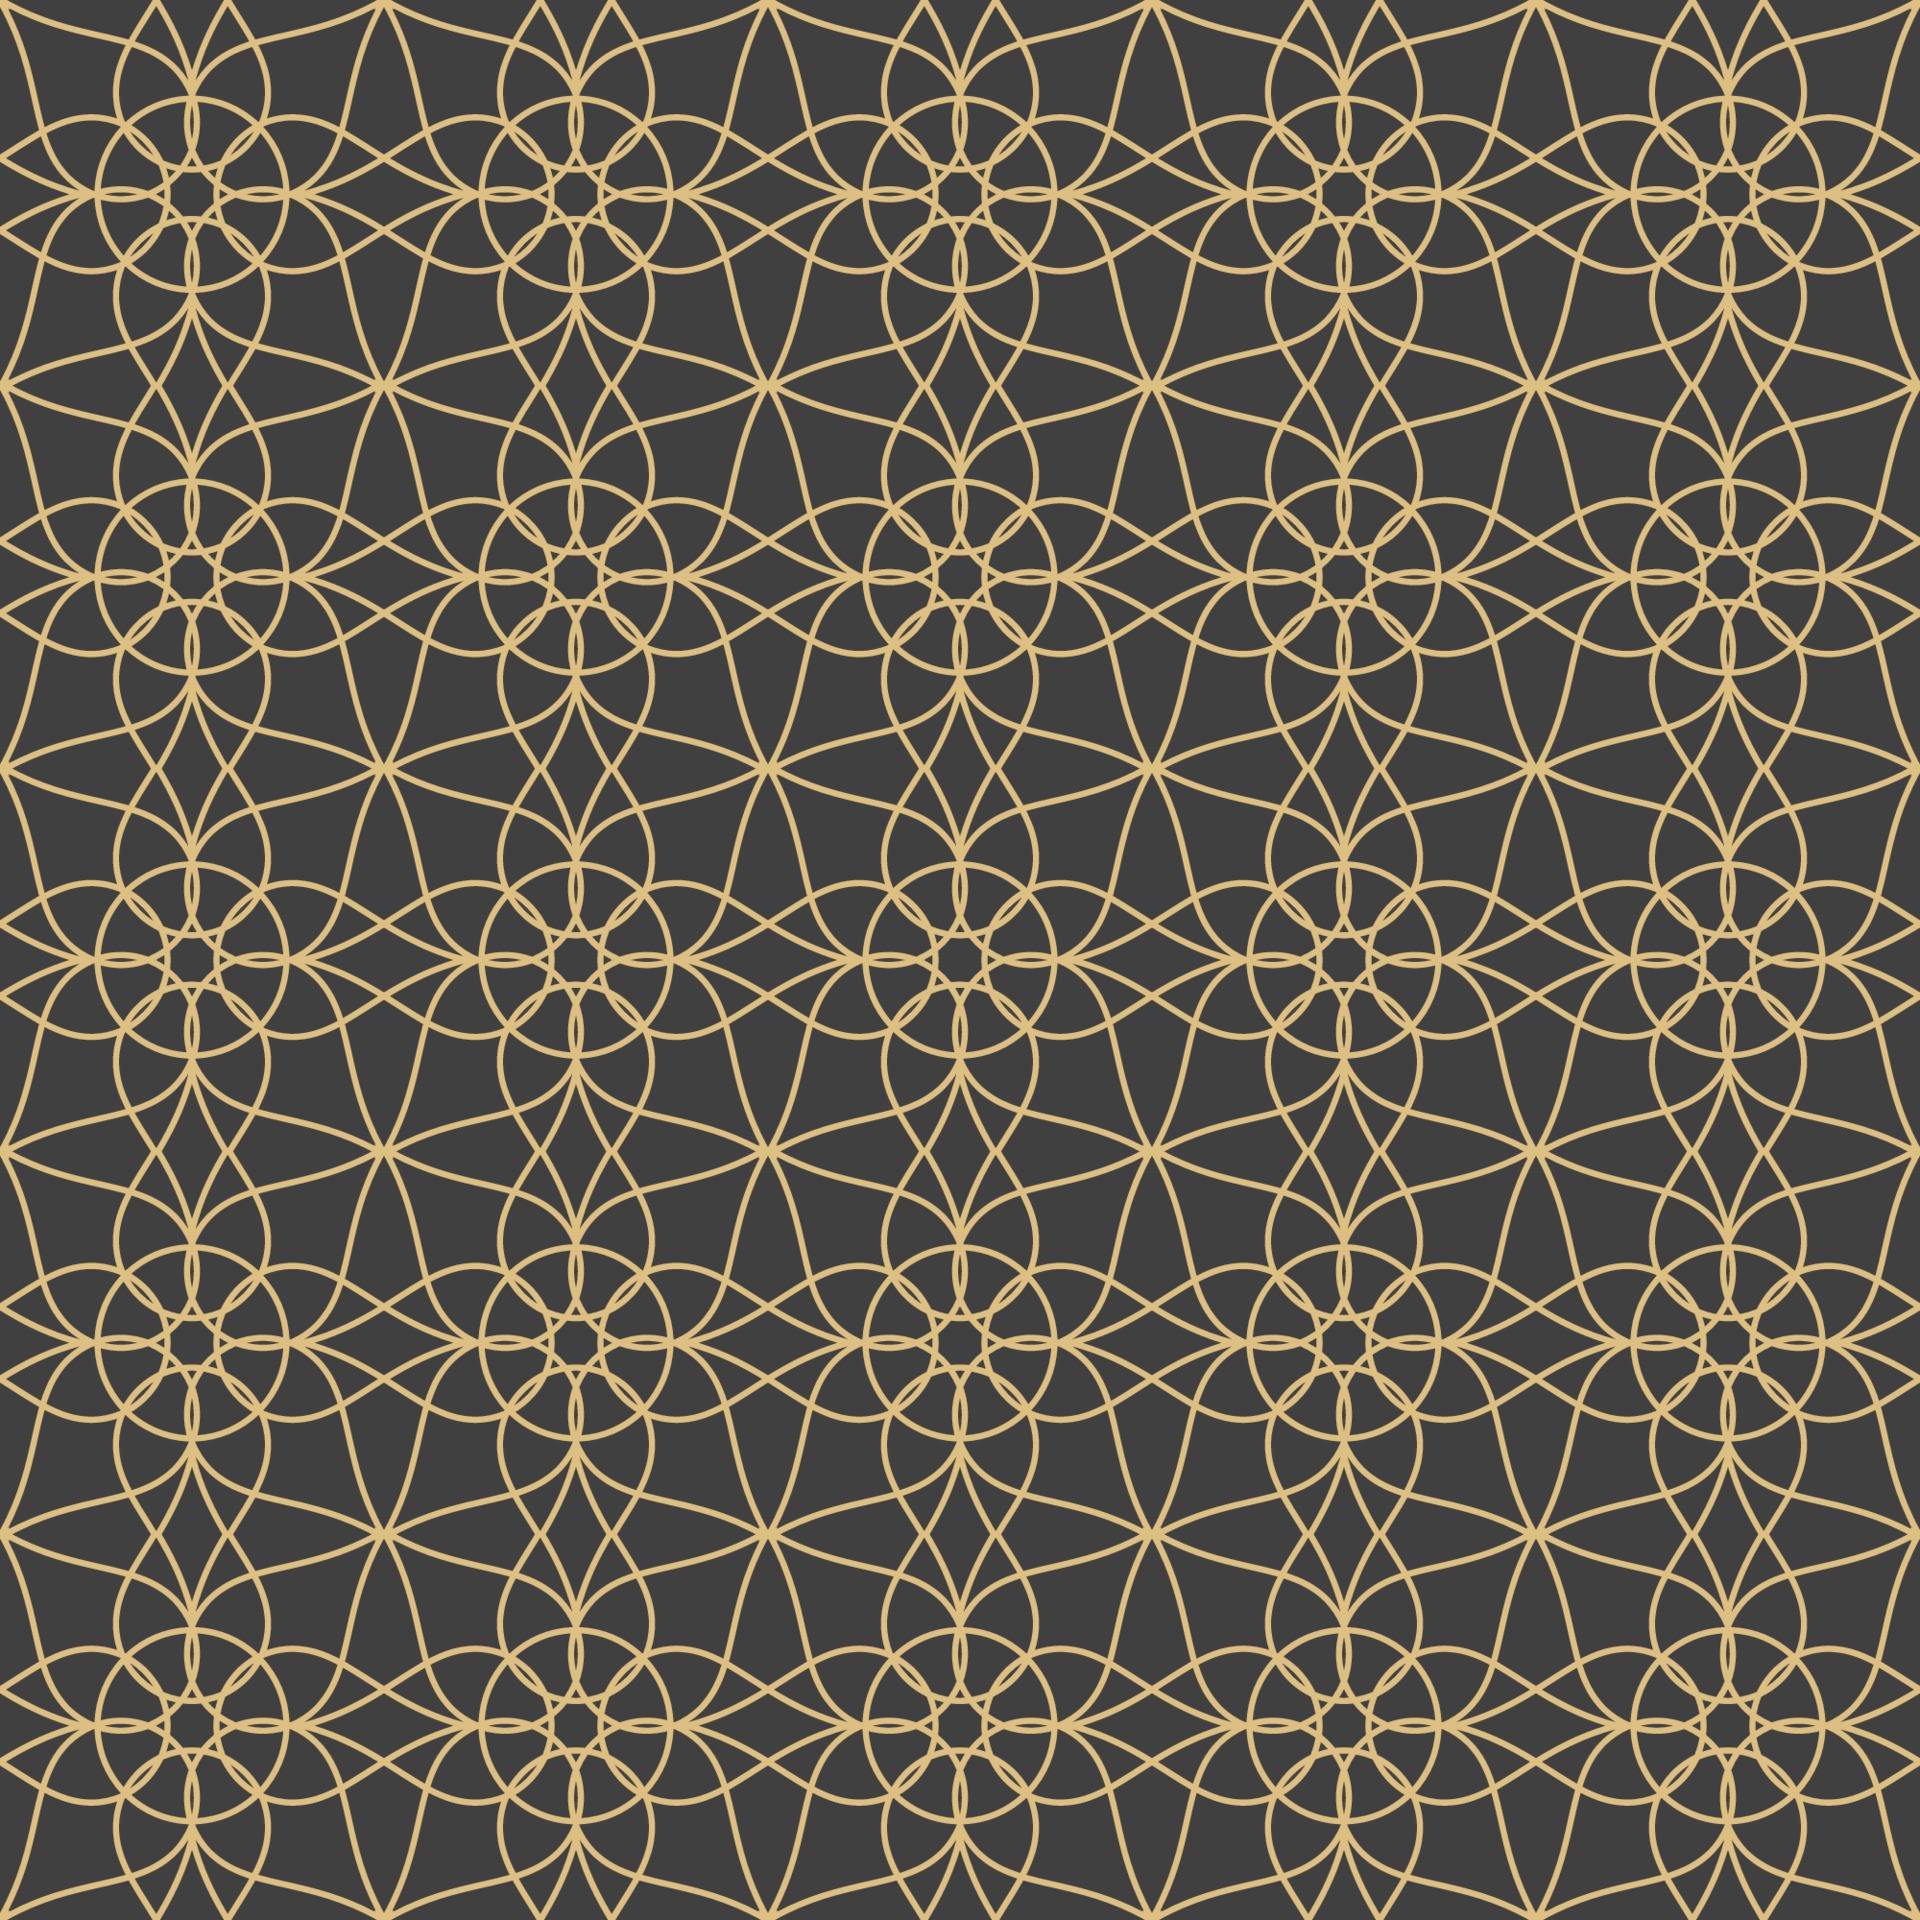 Arabic ornaments. Patterns, background and wallpaper for your design